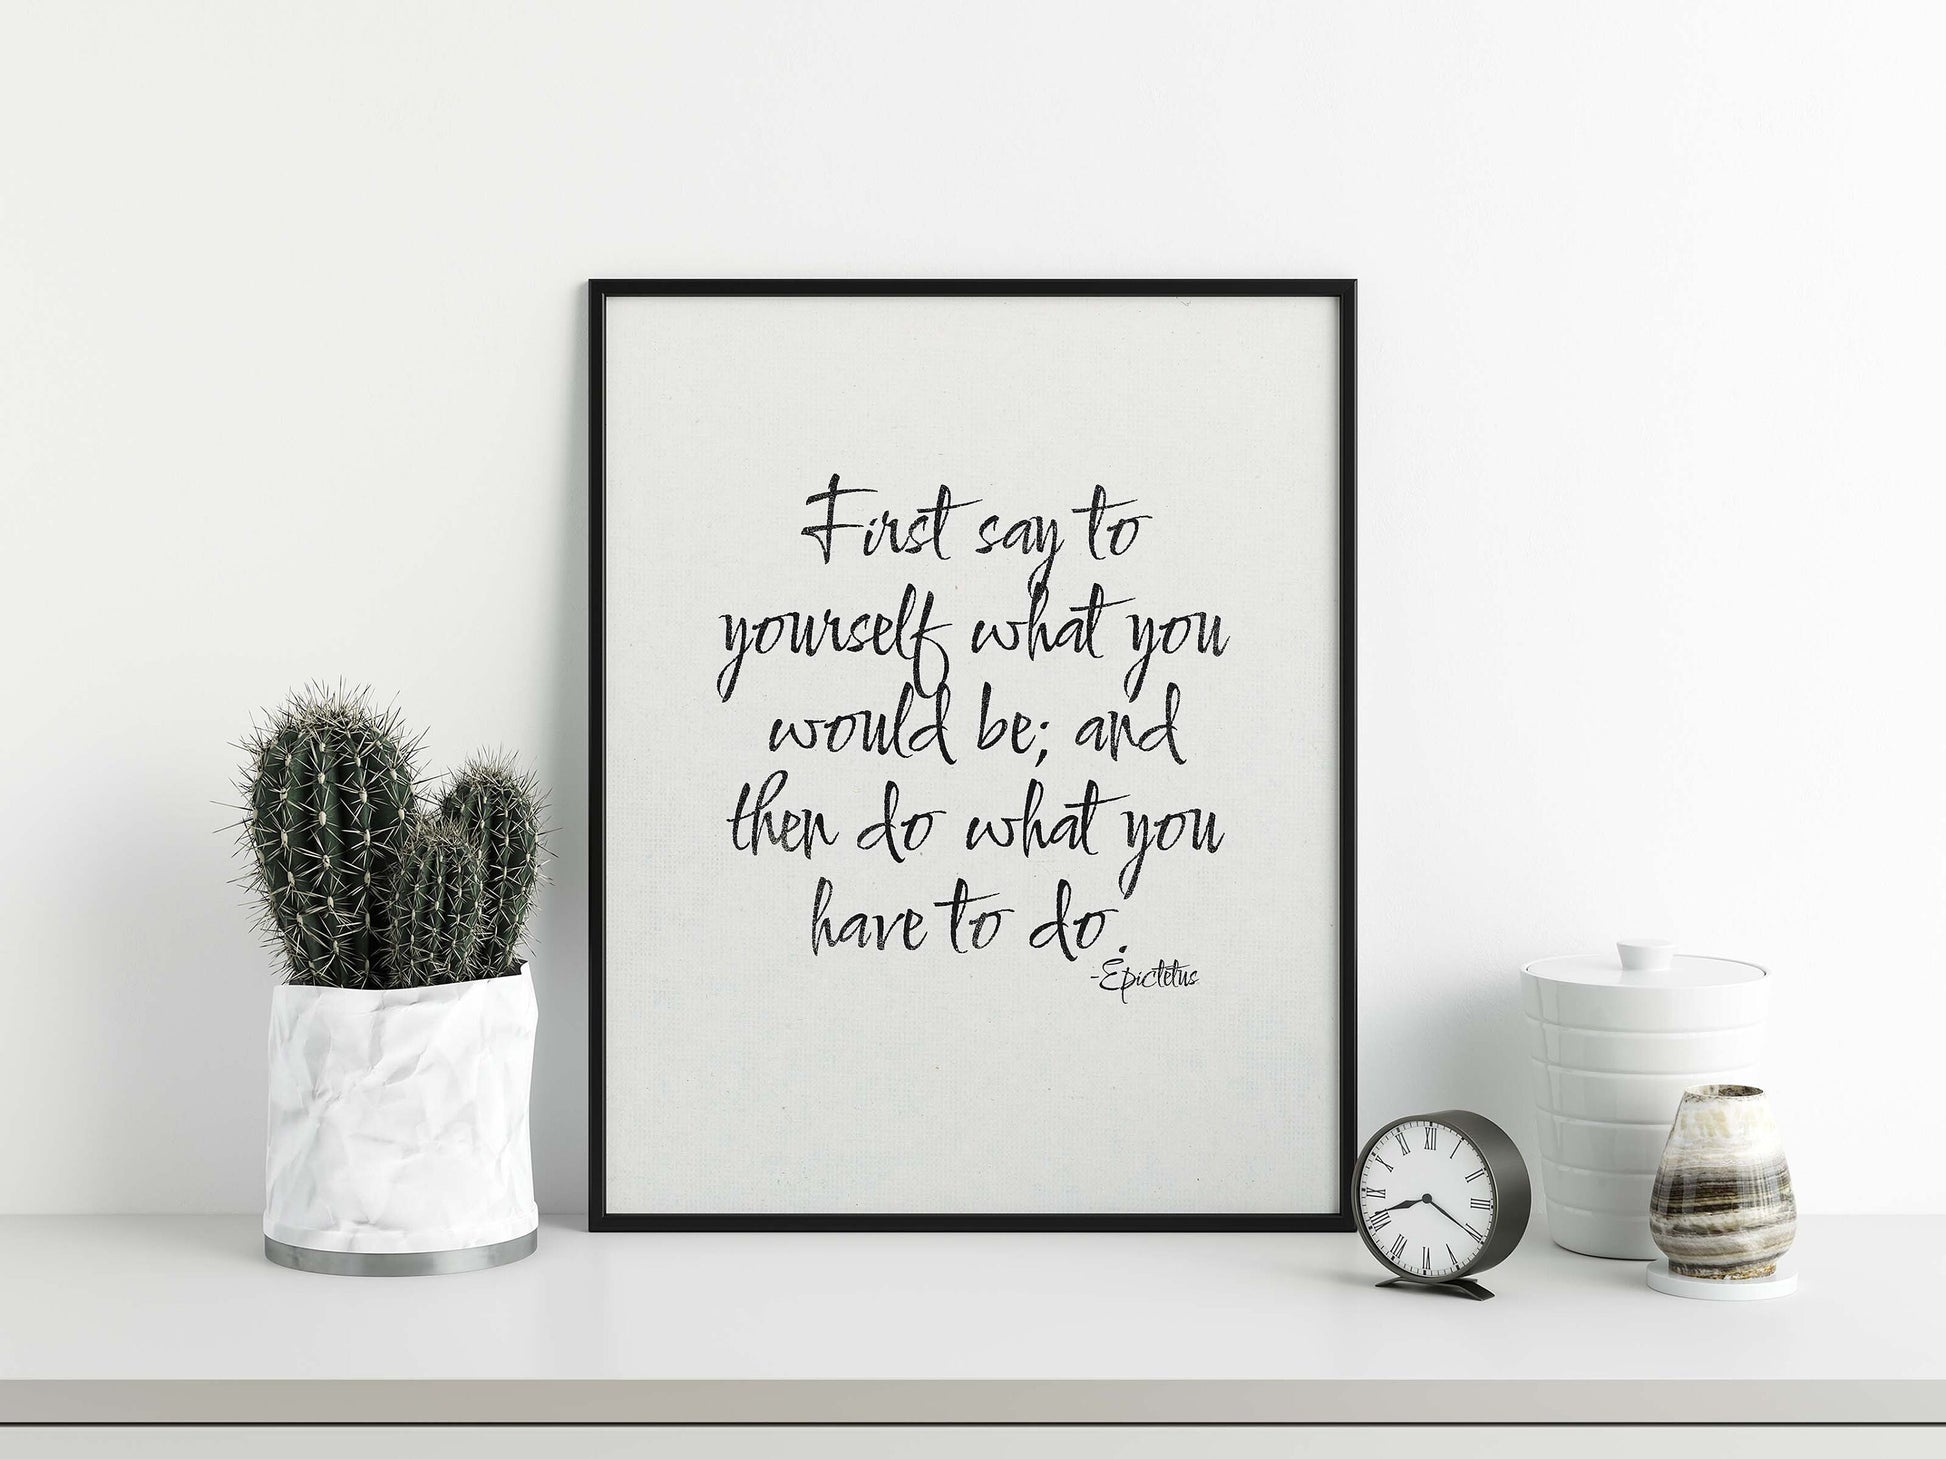 First say to yourself what you would be and then do what you have to do...Epictetus Quote print  black on white displayed in black frame